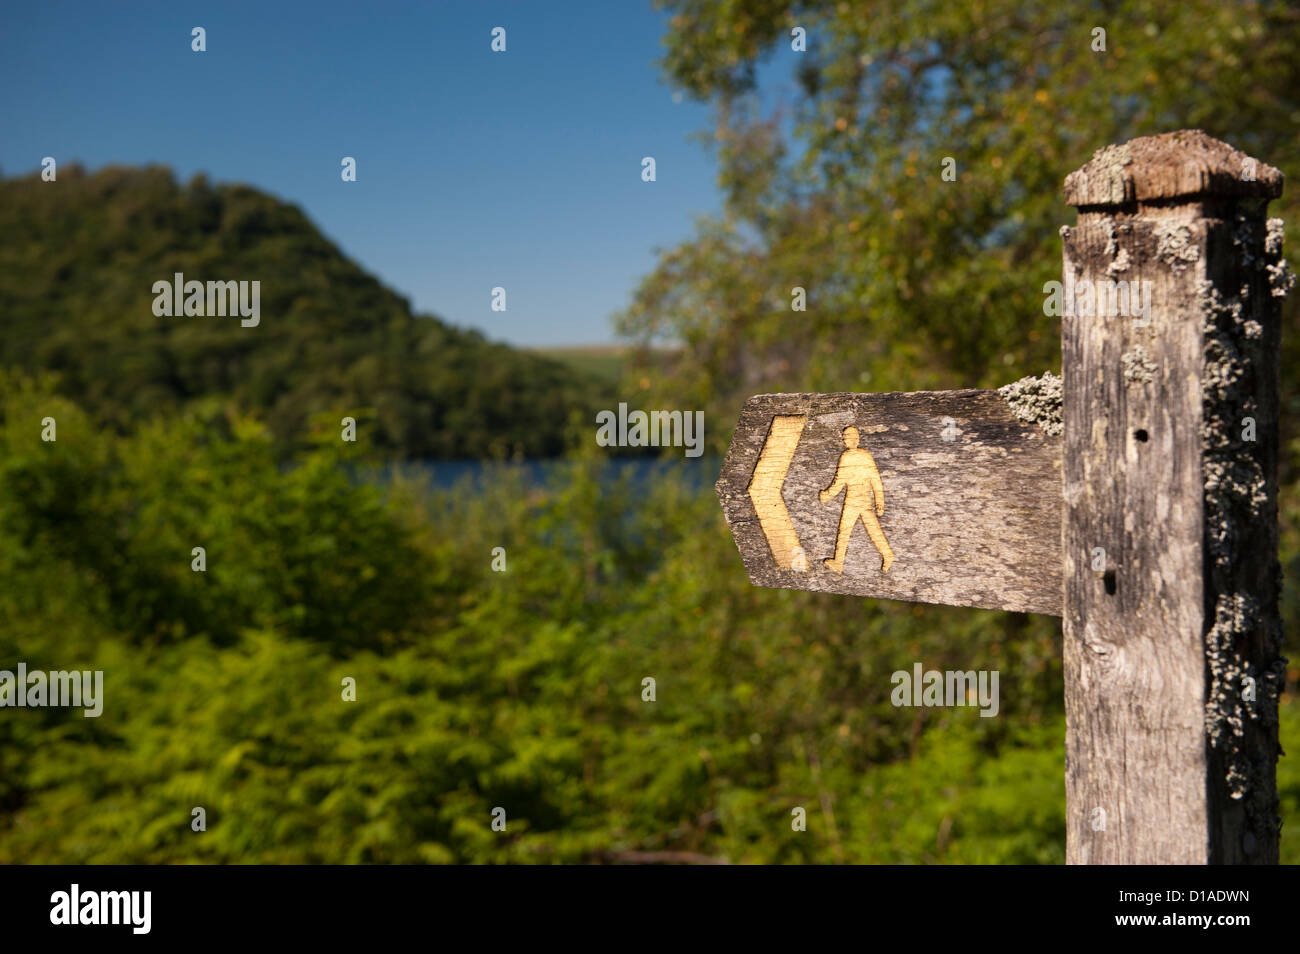 Wooden Footpath sign in the Elan Valley, Wales. Stock Photo